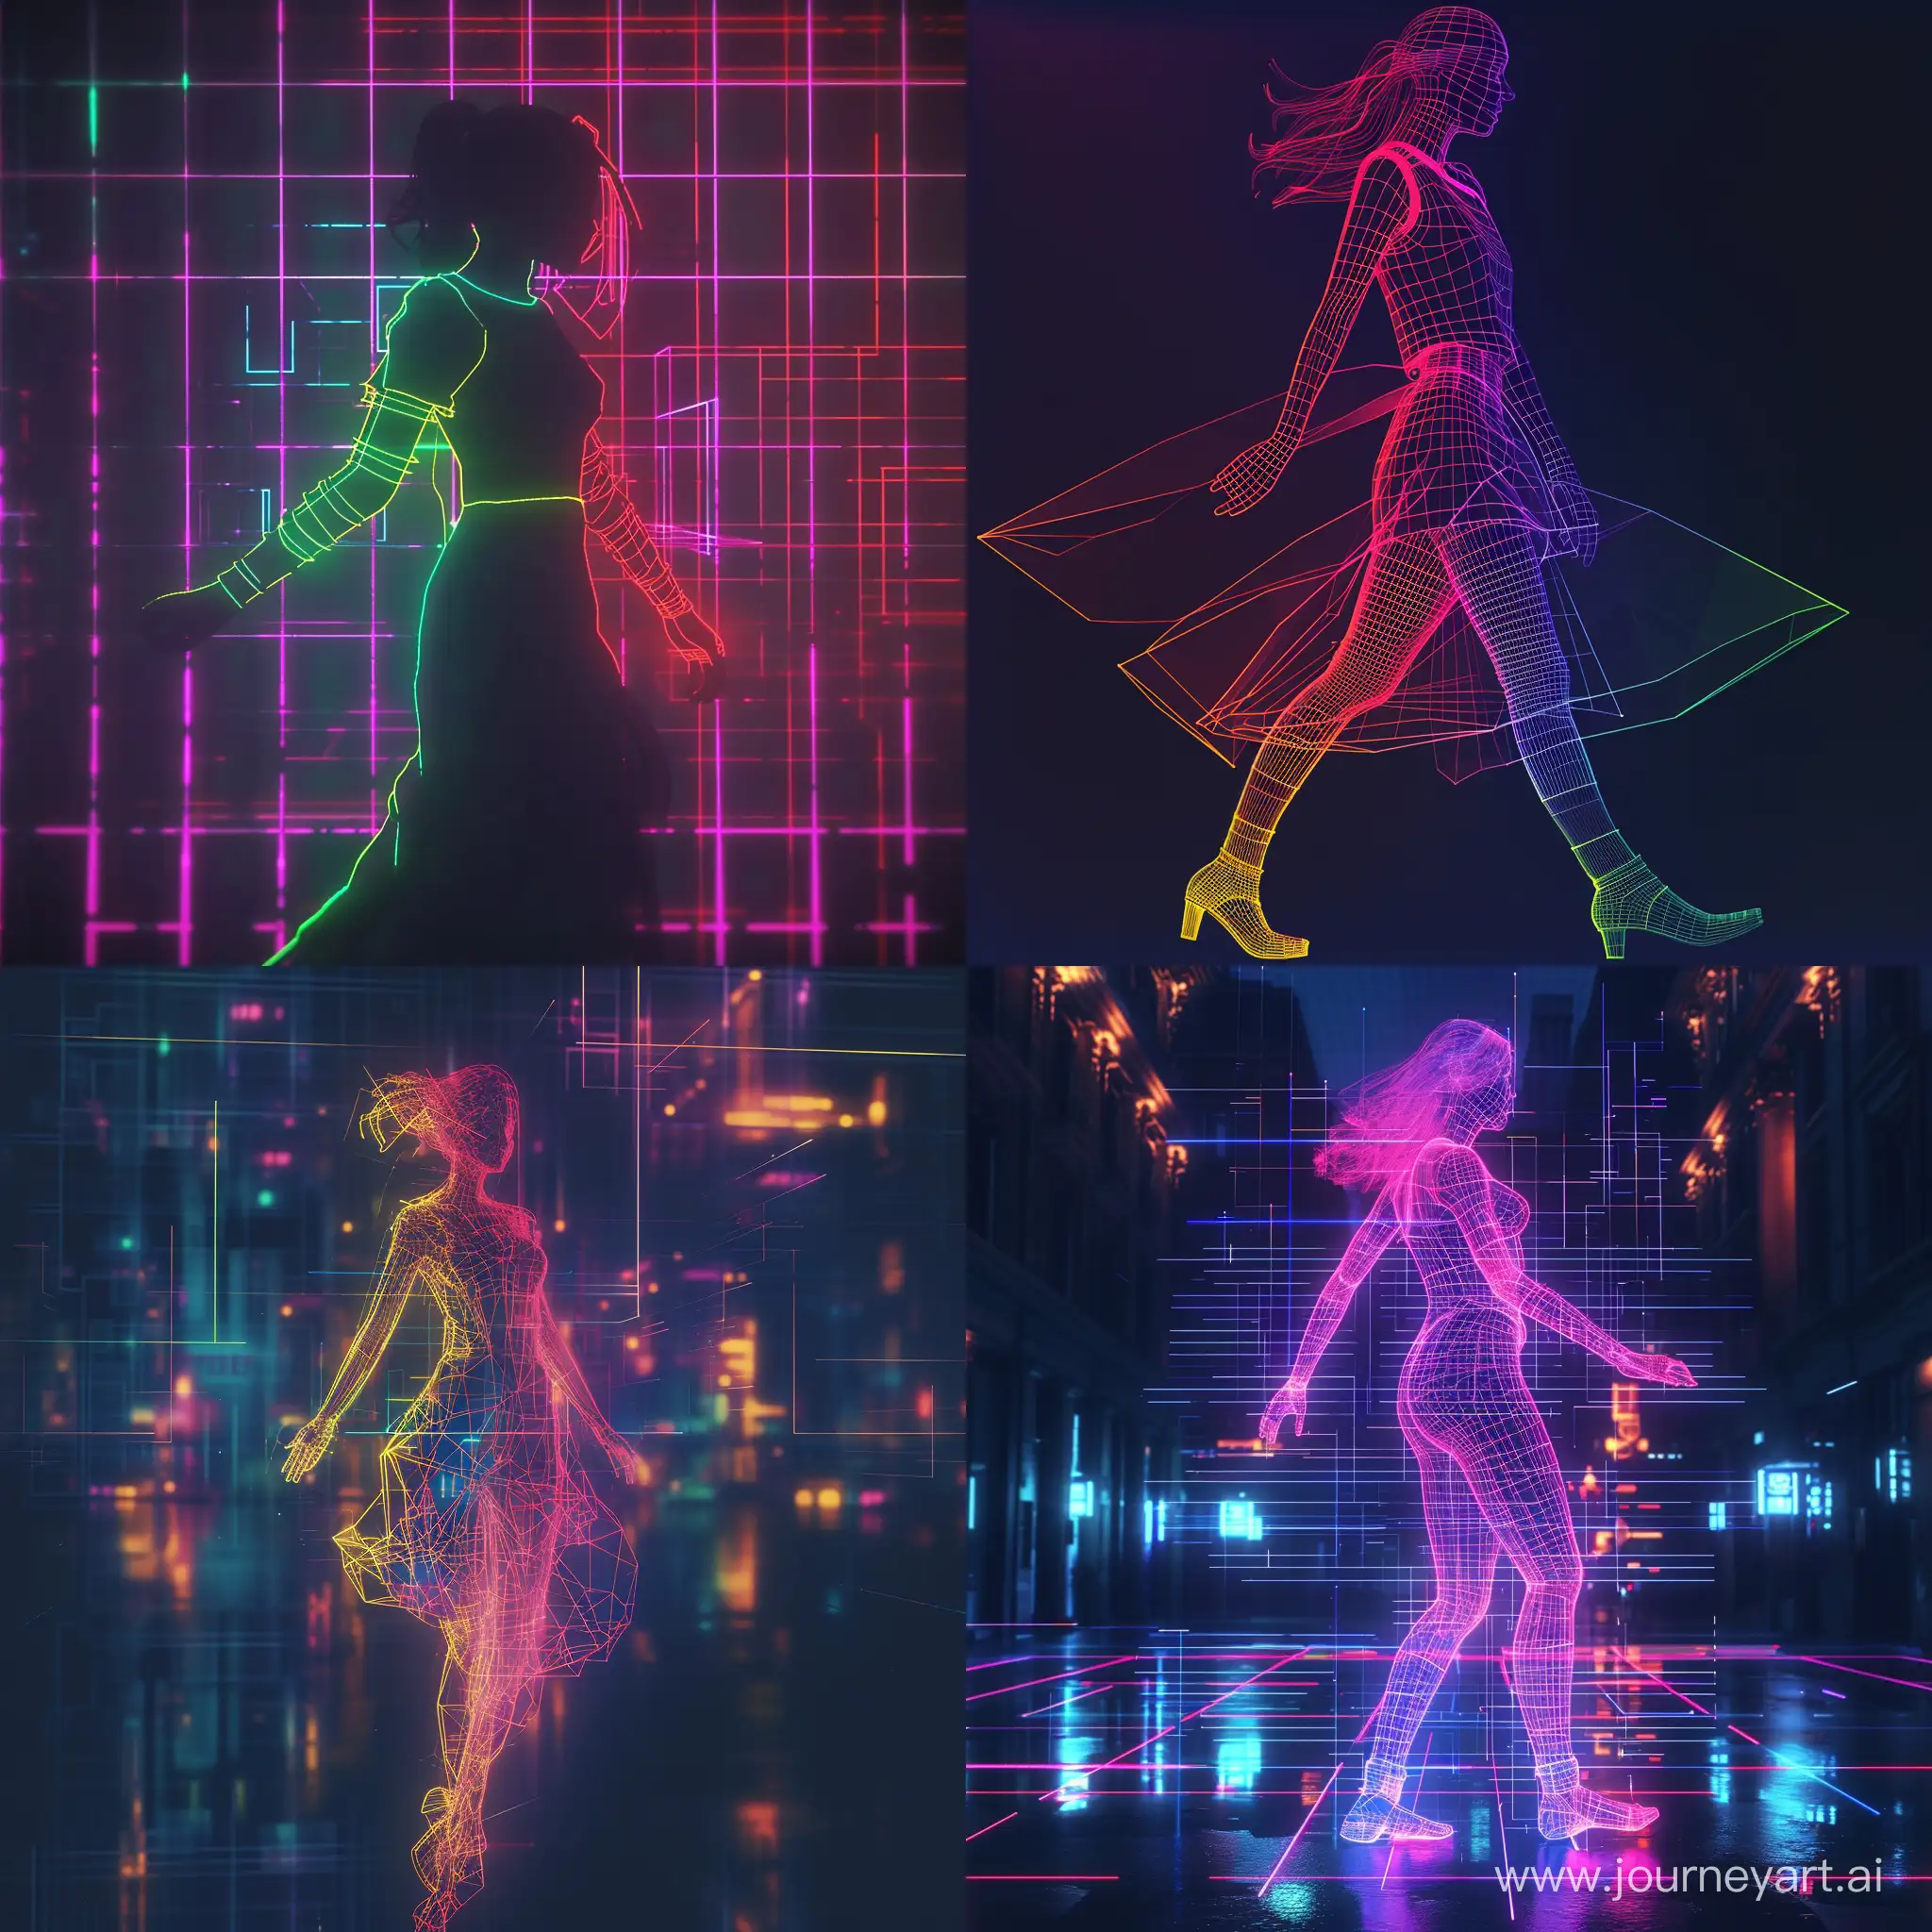 Wireframe Artwork - "Digital Neon Silhouette": Style/Artist: Piet Mondrian's abstract art, Gmunk's wireframe designs. Tags: 3D Render, Dynamic Motion, Vibrant, Conceptual. Prompt: Design a Alluring Woman in Dynamic Motion in Neon wireframe, with details akin to a digital blueprint. The scene should radiate with neon colors against a dark background, incorporating Mondrian's geometric precision and Gmunk's digital aesthetics. Highlight the intersection of technology and Female Allure., dark fantasy, 3d render, illustration, vibrant, architecture, cinematicv0.2

 --v 6 --ar 1:1 --no 33131